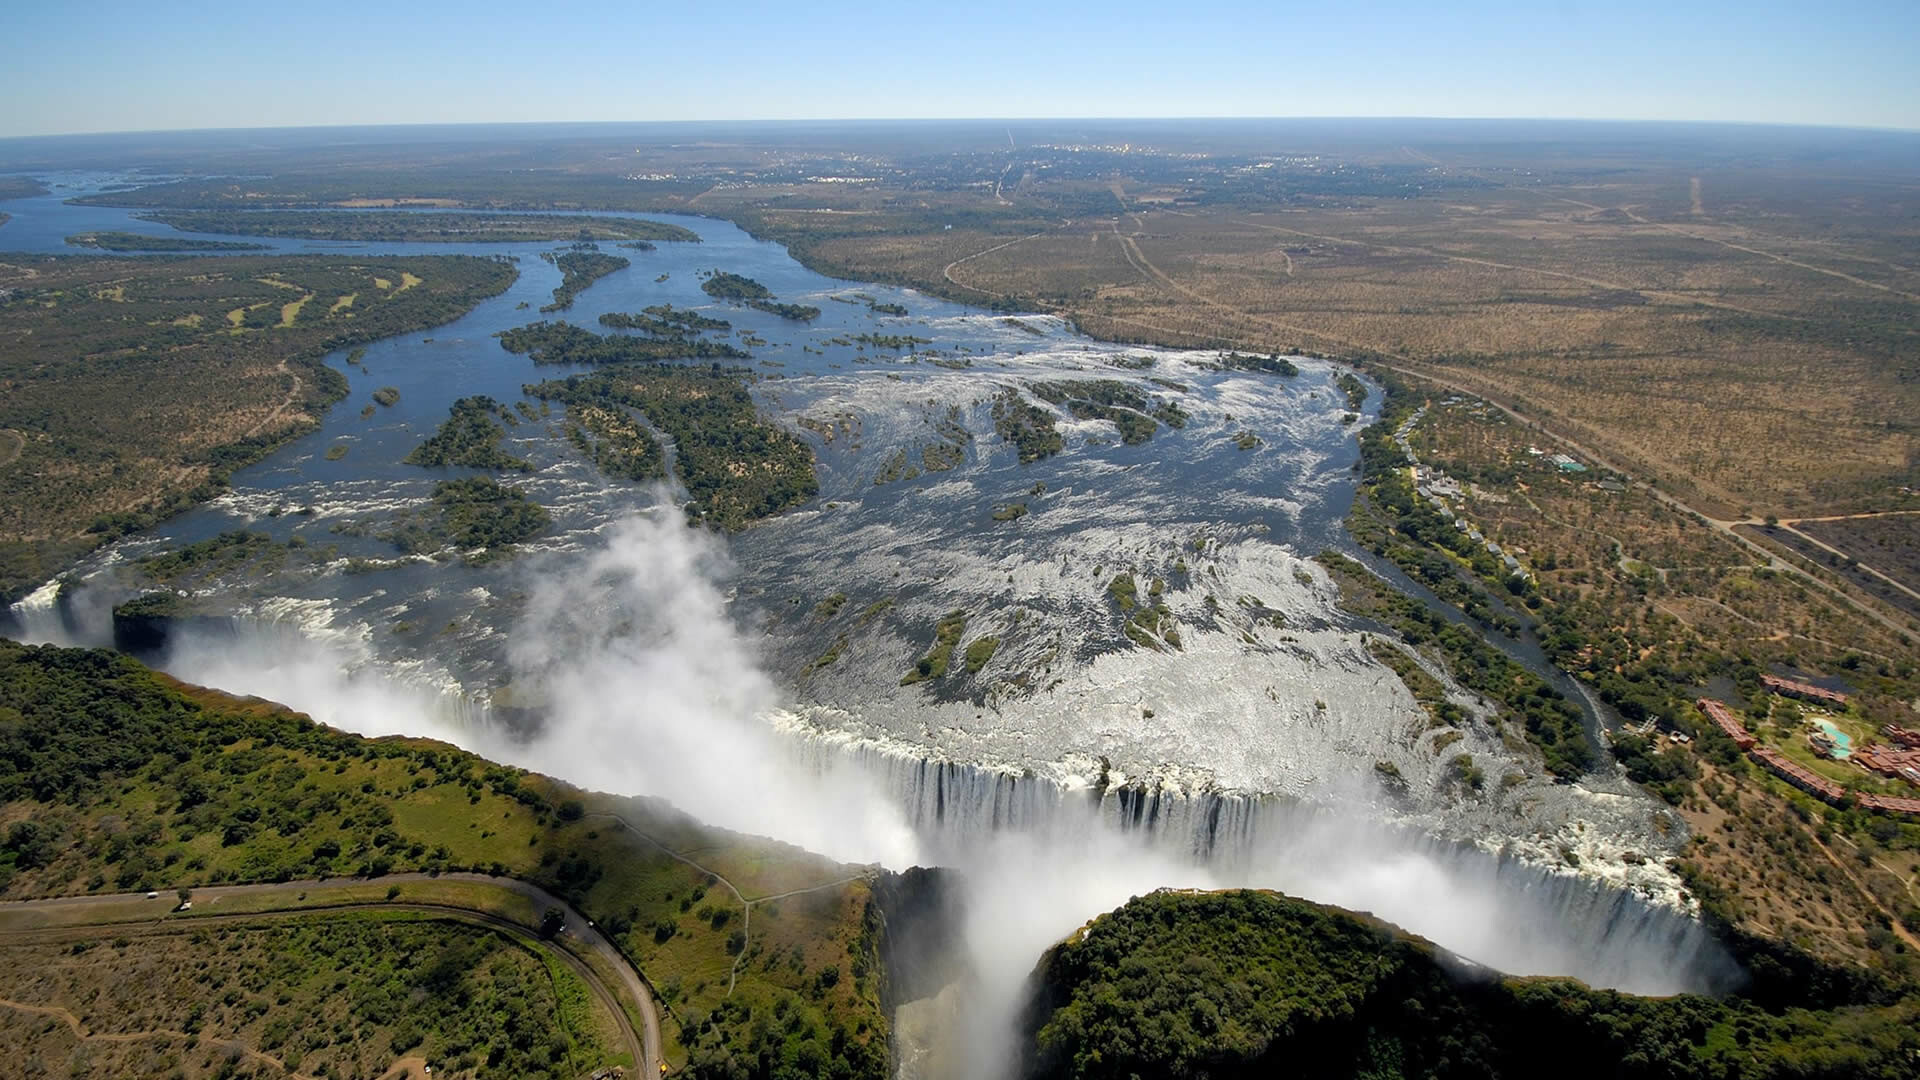 Victoria Falls: Zimbabwe, Africa's iconic site, The largest waterfall in the world. 1920x1080 Full HD Wallpaper.